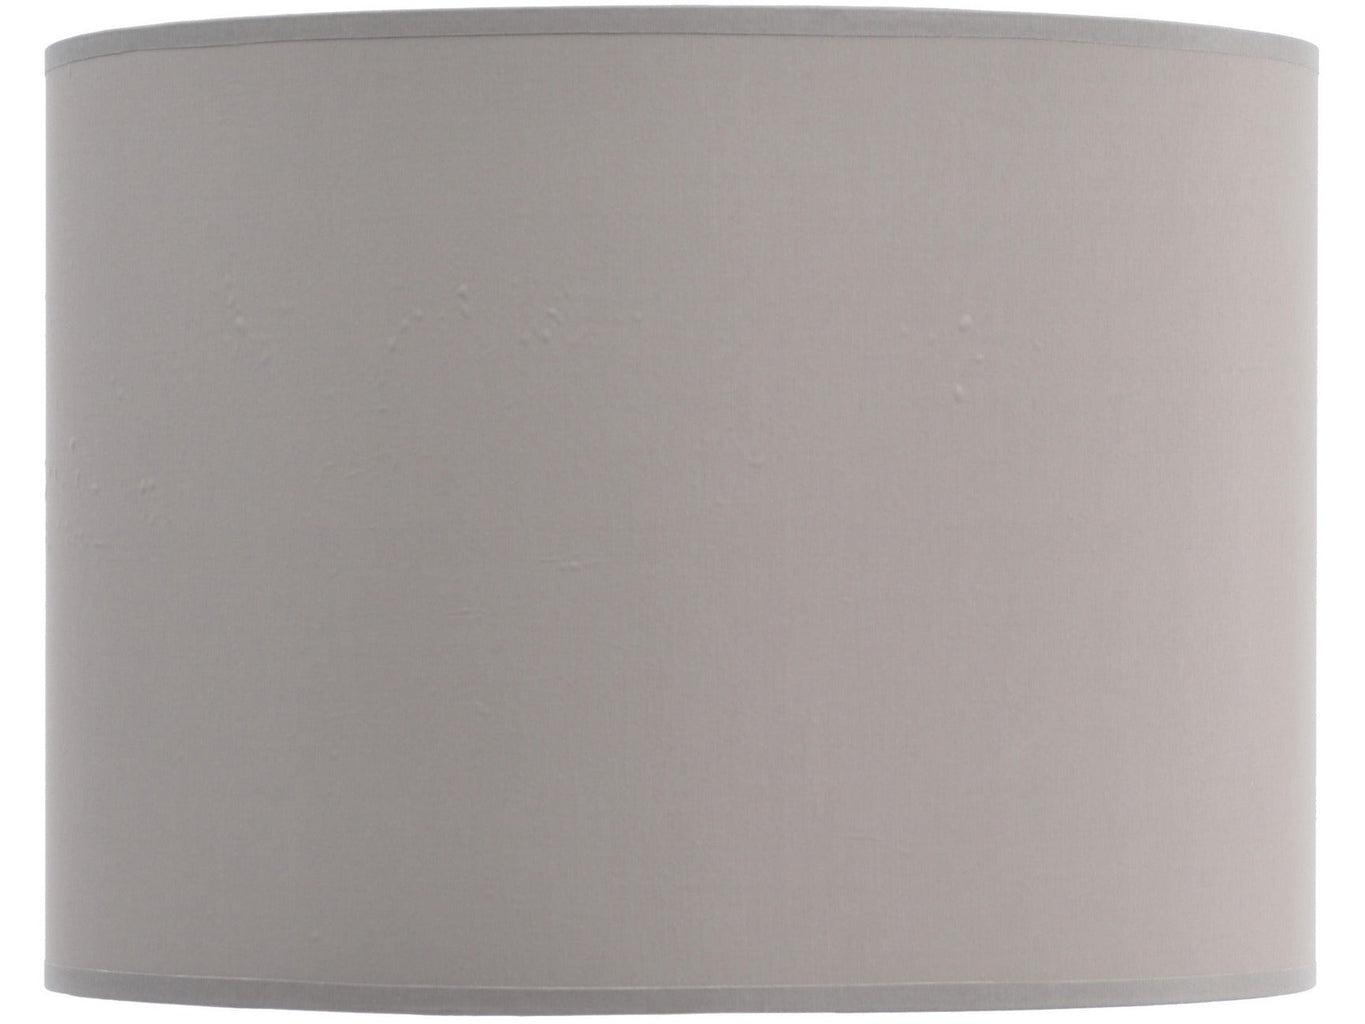 Opulent Taupe and Champagne Lined Drum 14" Lampshade-Beaumonde